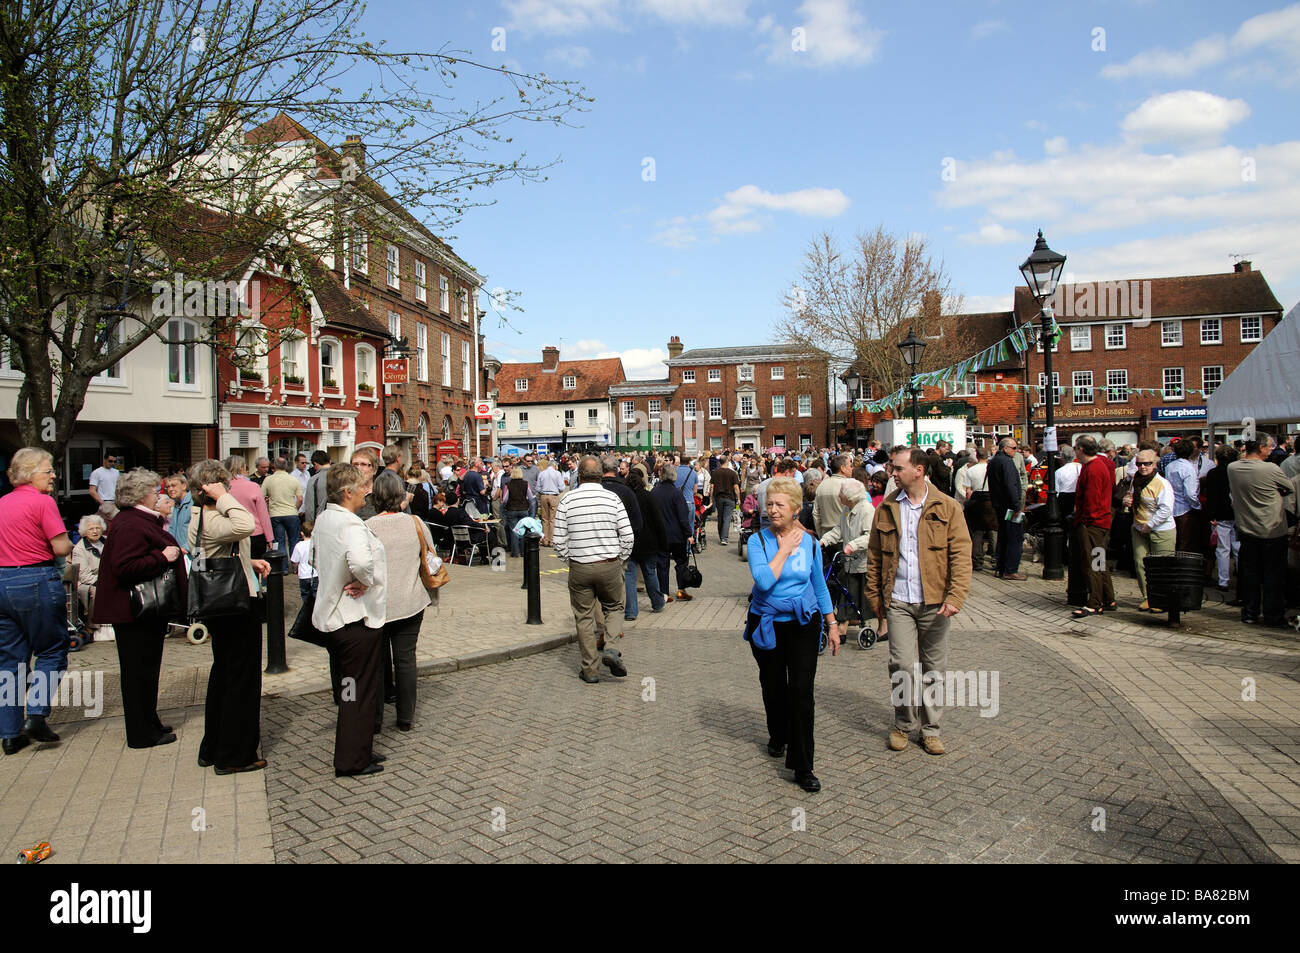 Petersfield town centre busy with people Hamsphire England UK Stock Photo